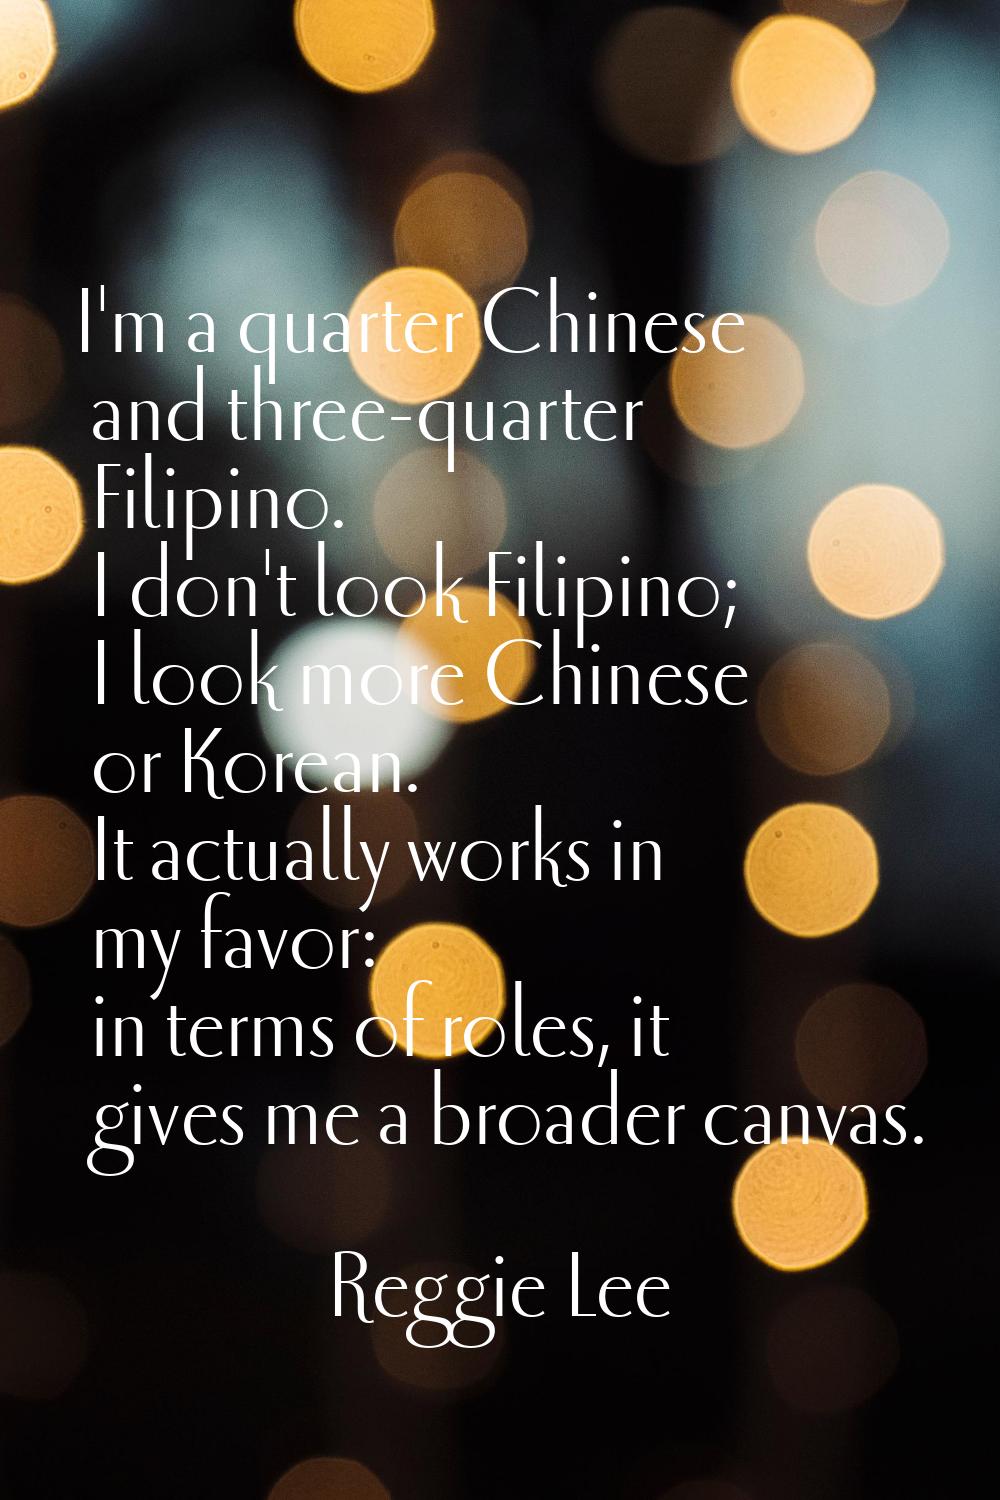 I'm a quarter Chinese and three-quarter Filipino. I don't look Filipino; I look more Chinese or Kor